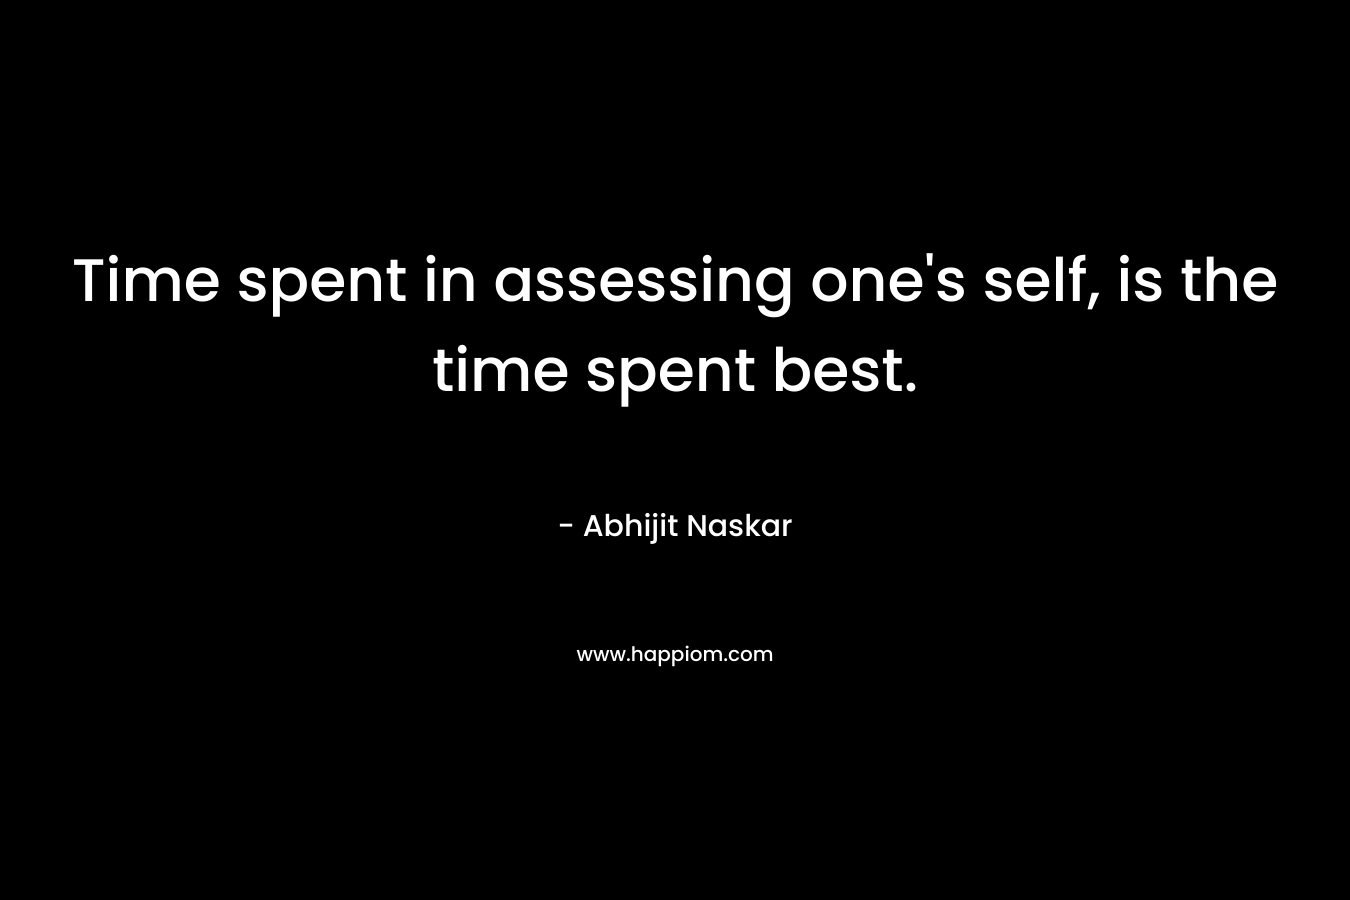 Time spent in assessing one's self, is the time spent best.